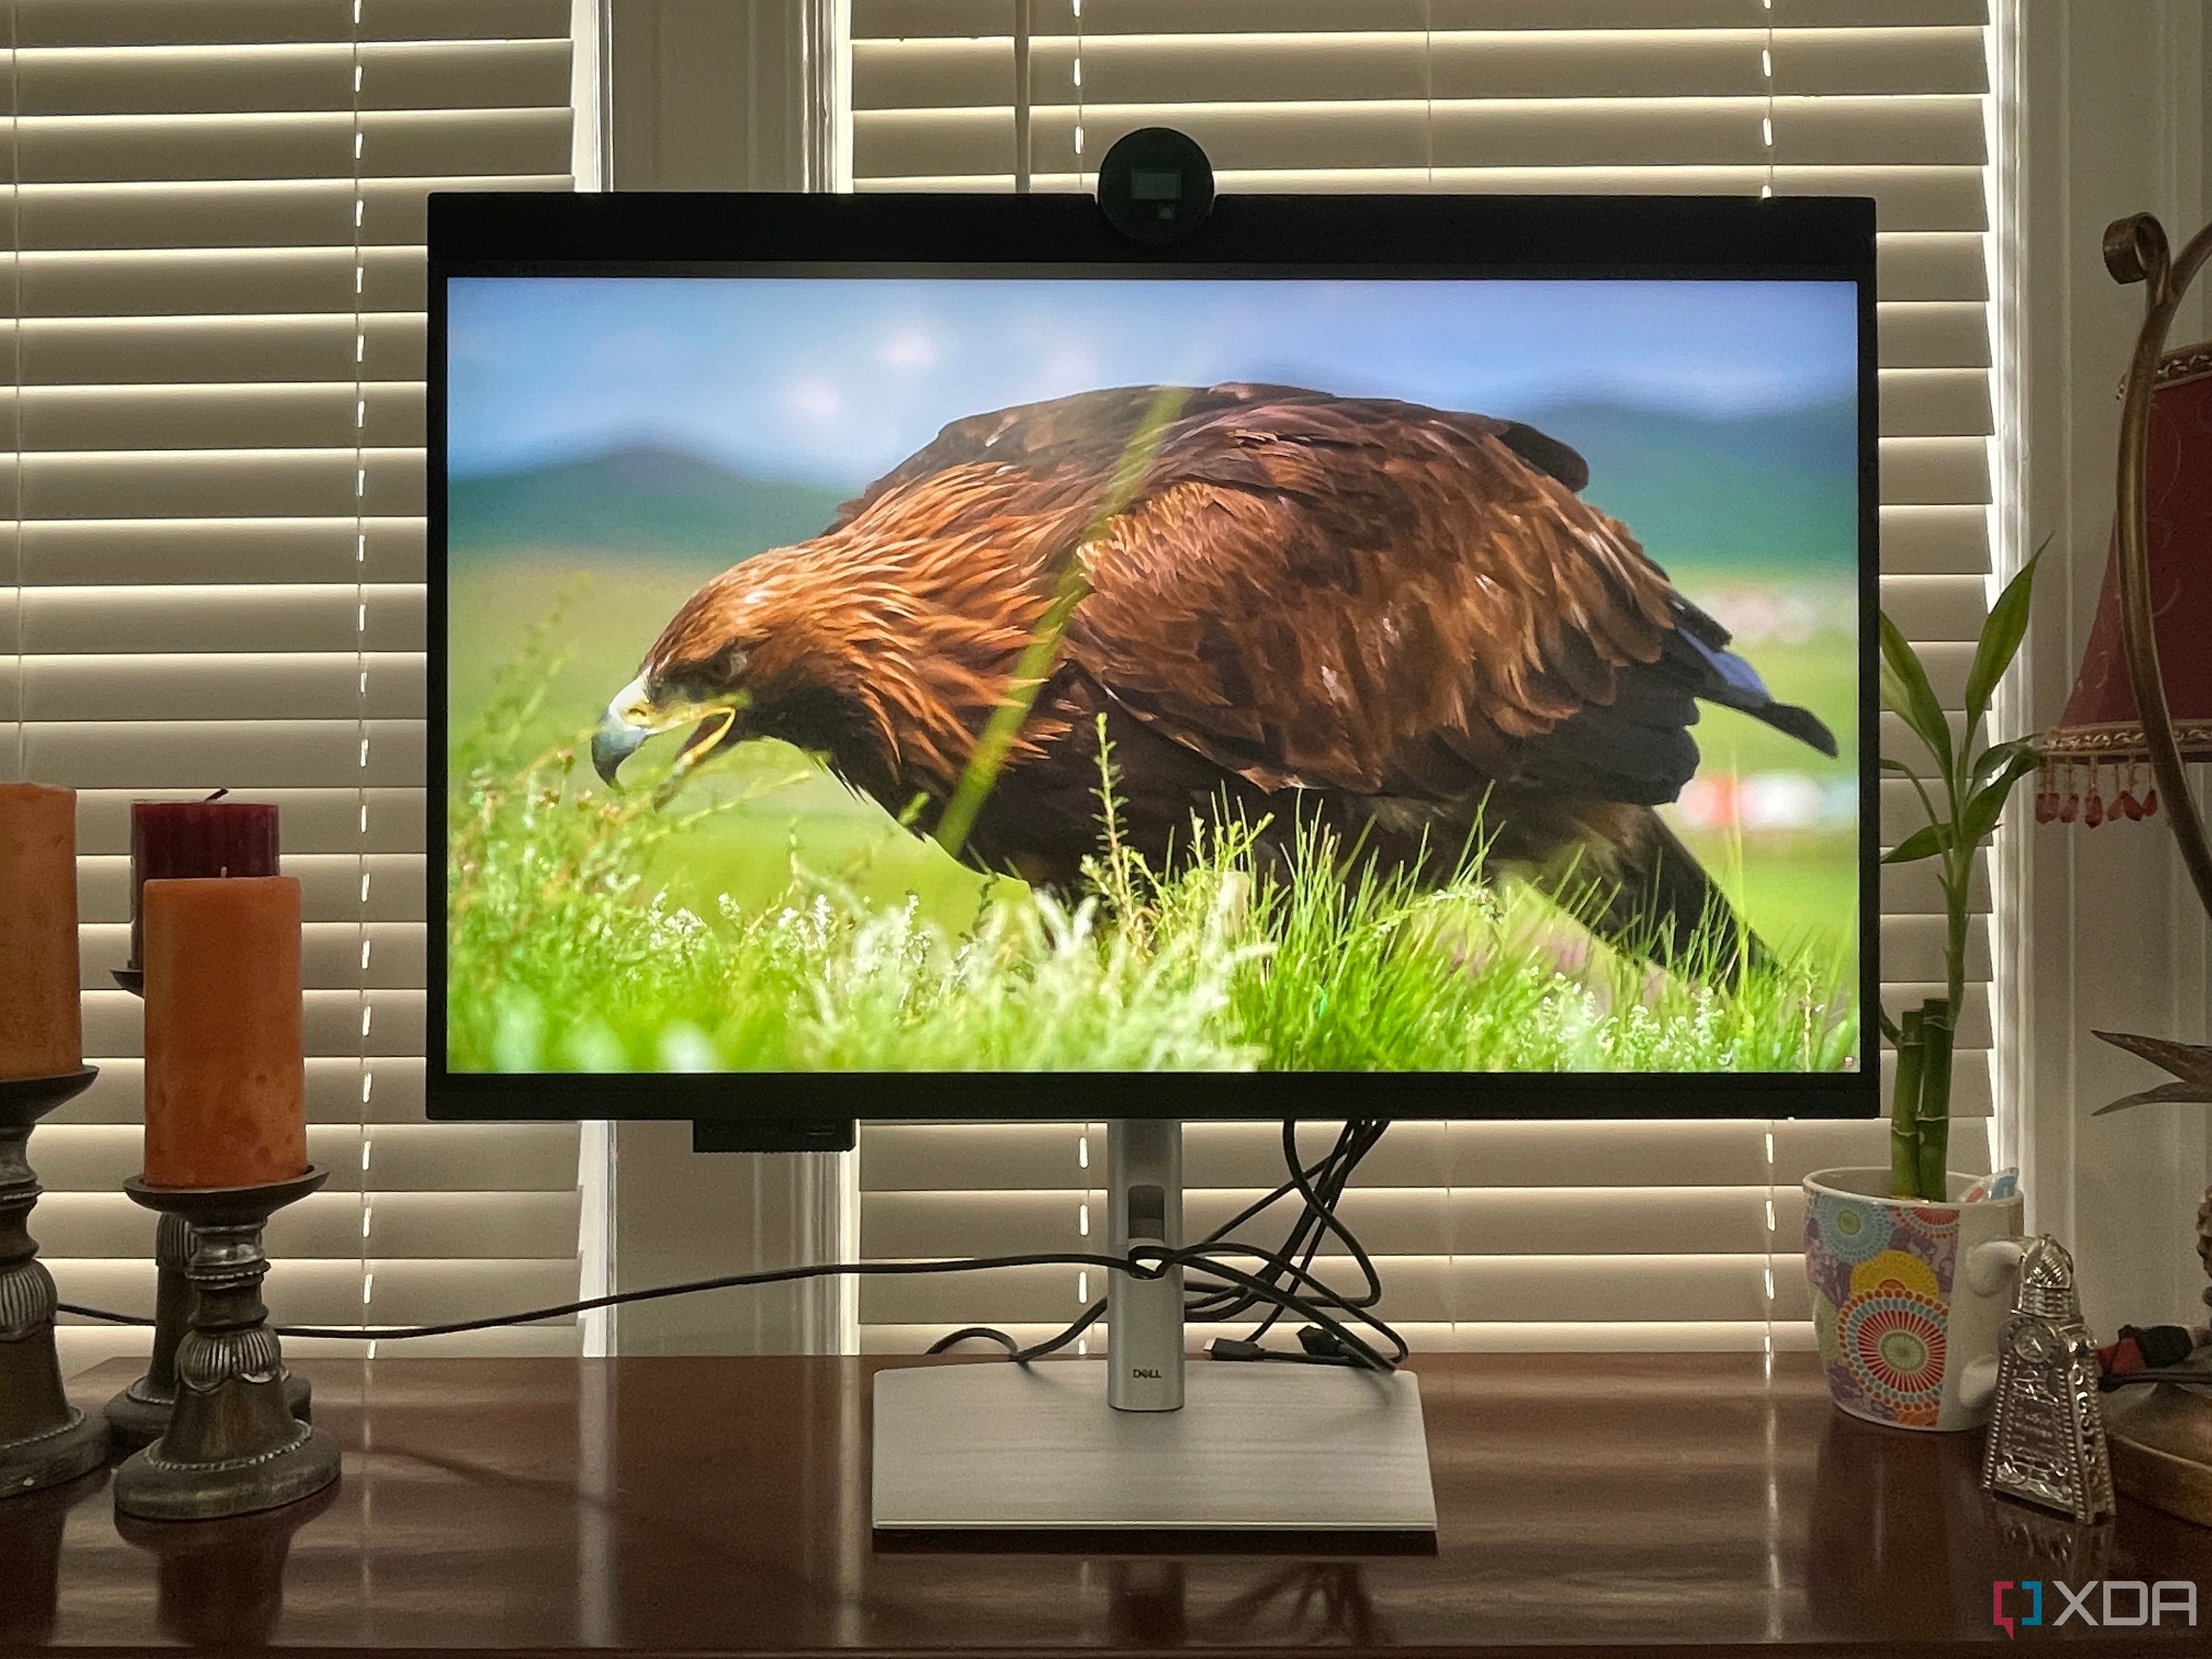 Image of a bird on the Dell UltraSharp 32 6K Monitor